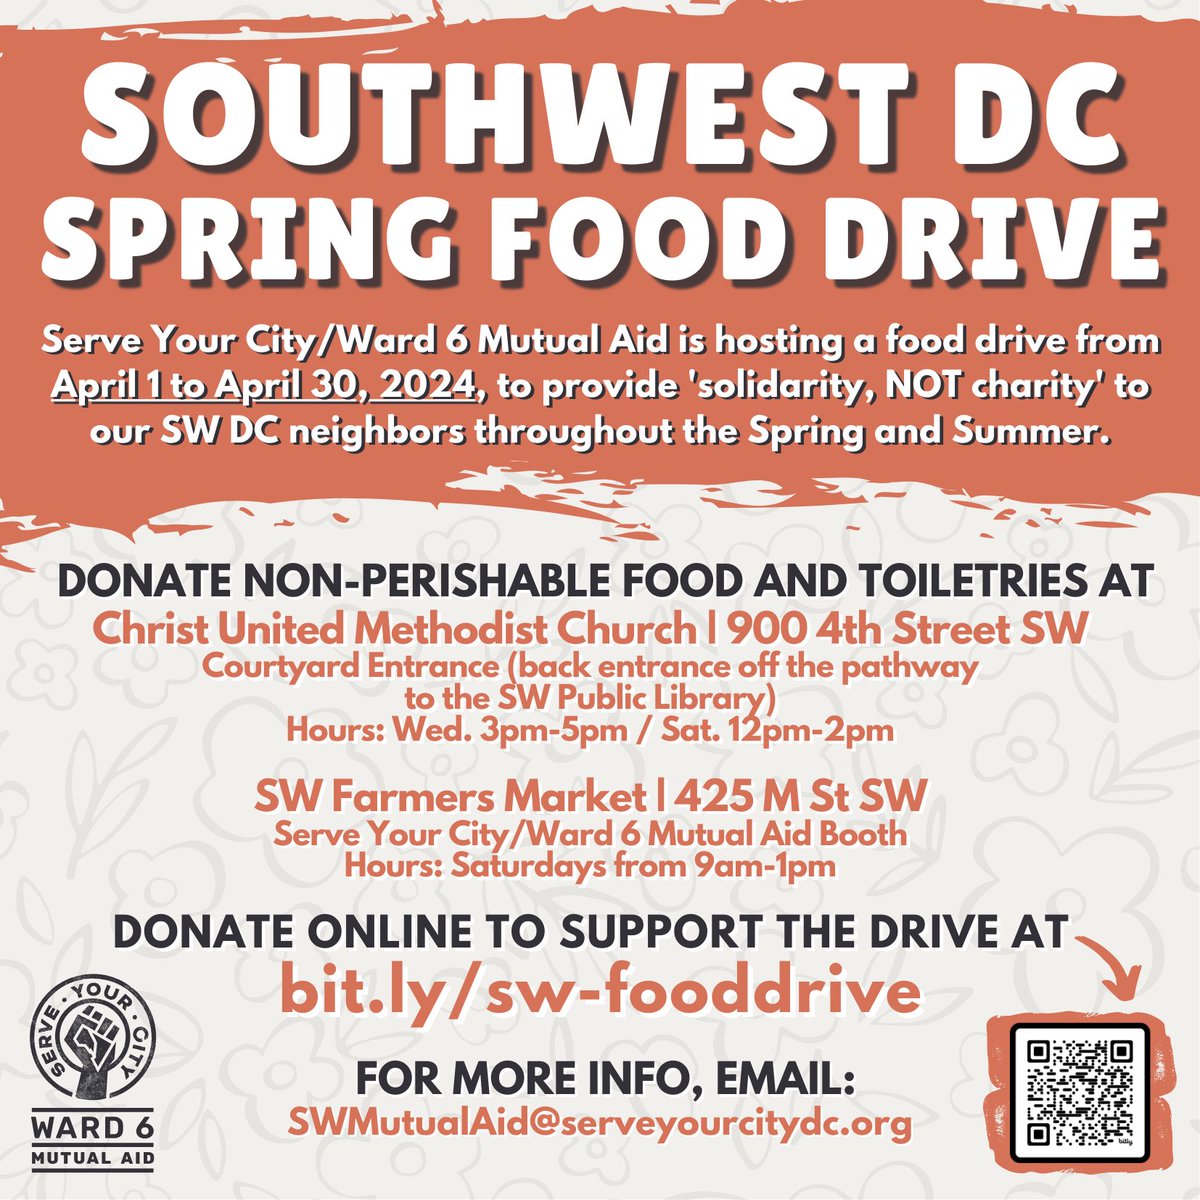 🚨LAST DAY ALERT🚨 Today (Apr-30) is your final chance to join us in showing #solidarityNOTcharity by donating to #ServeYourCityDC/#Ward6MutualAid’s SW #DC Spring #FoodDrive! See flyer for details ➡️ bit.ly/sw-fooddrive. Let's support our #SWDC neighbors this Spring & Summer!